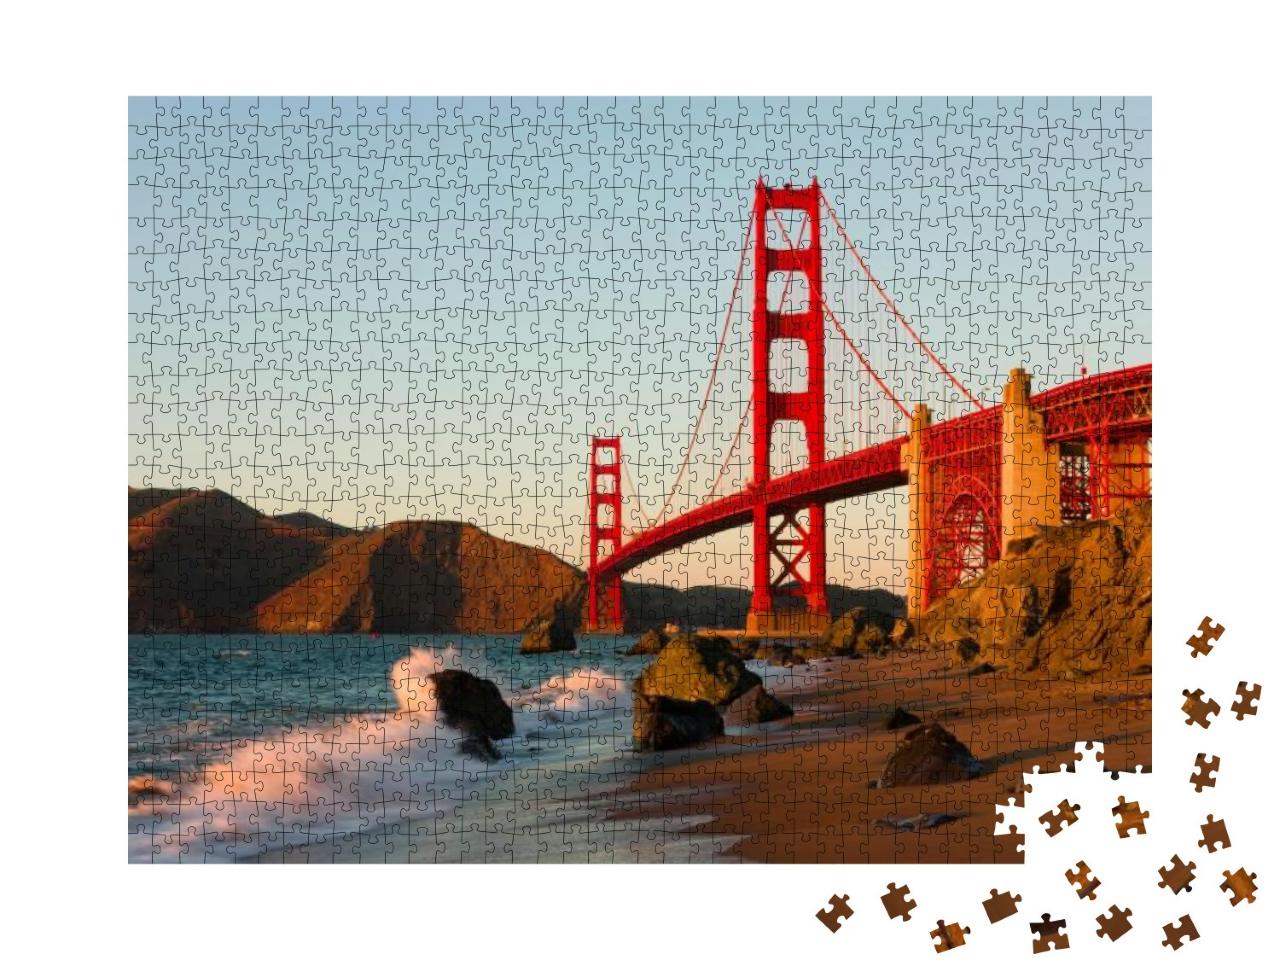 Golden Gate Bridge in San Francisco At Sunset... Jigsaw Puzzle with 1000 pieces